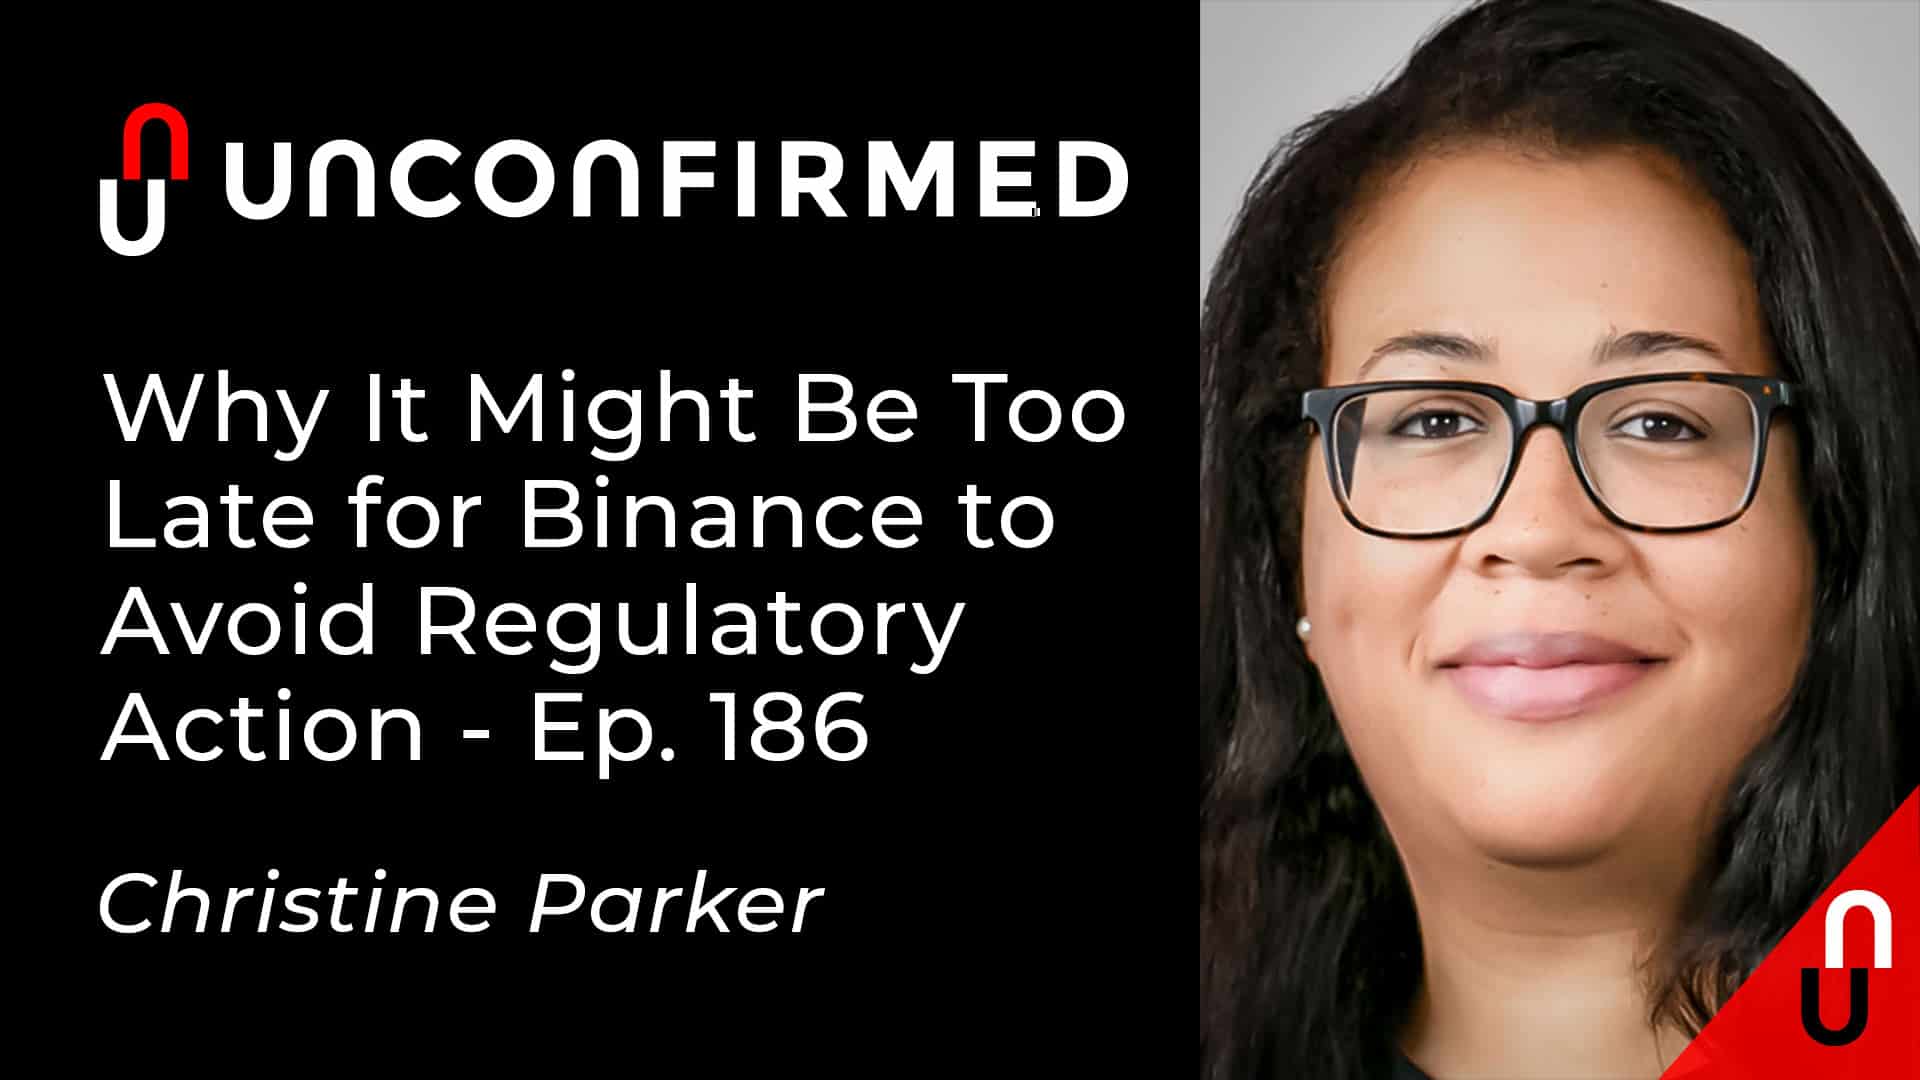 Unconfirmed - Ep.186 - Why It Might Be Too Late for Binance to Avoid Regulatory Action